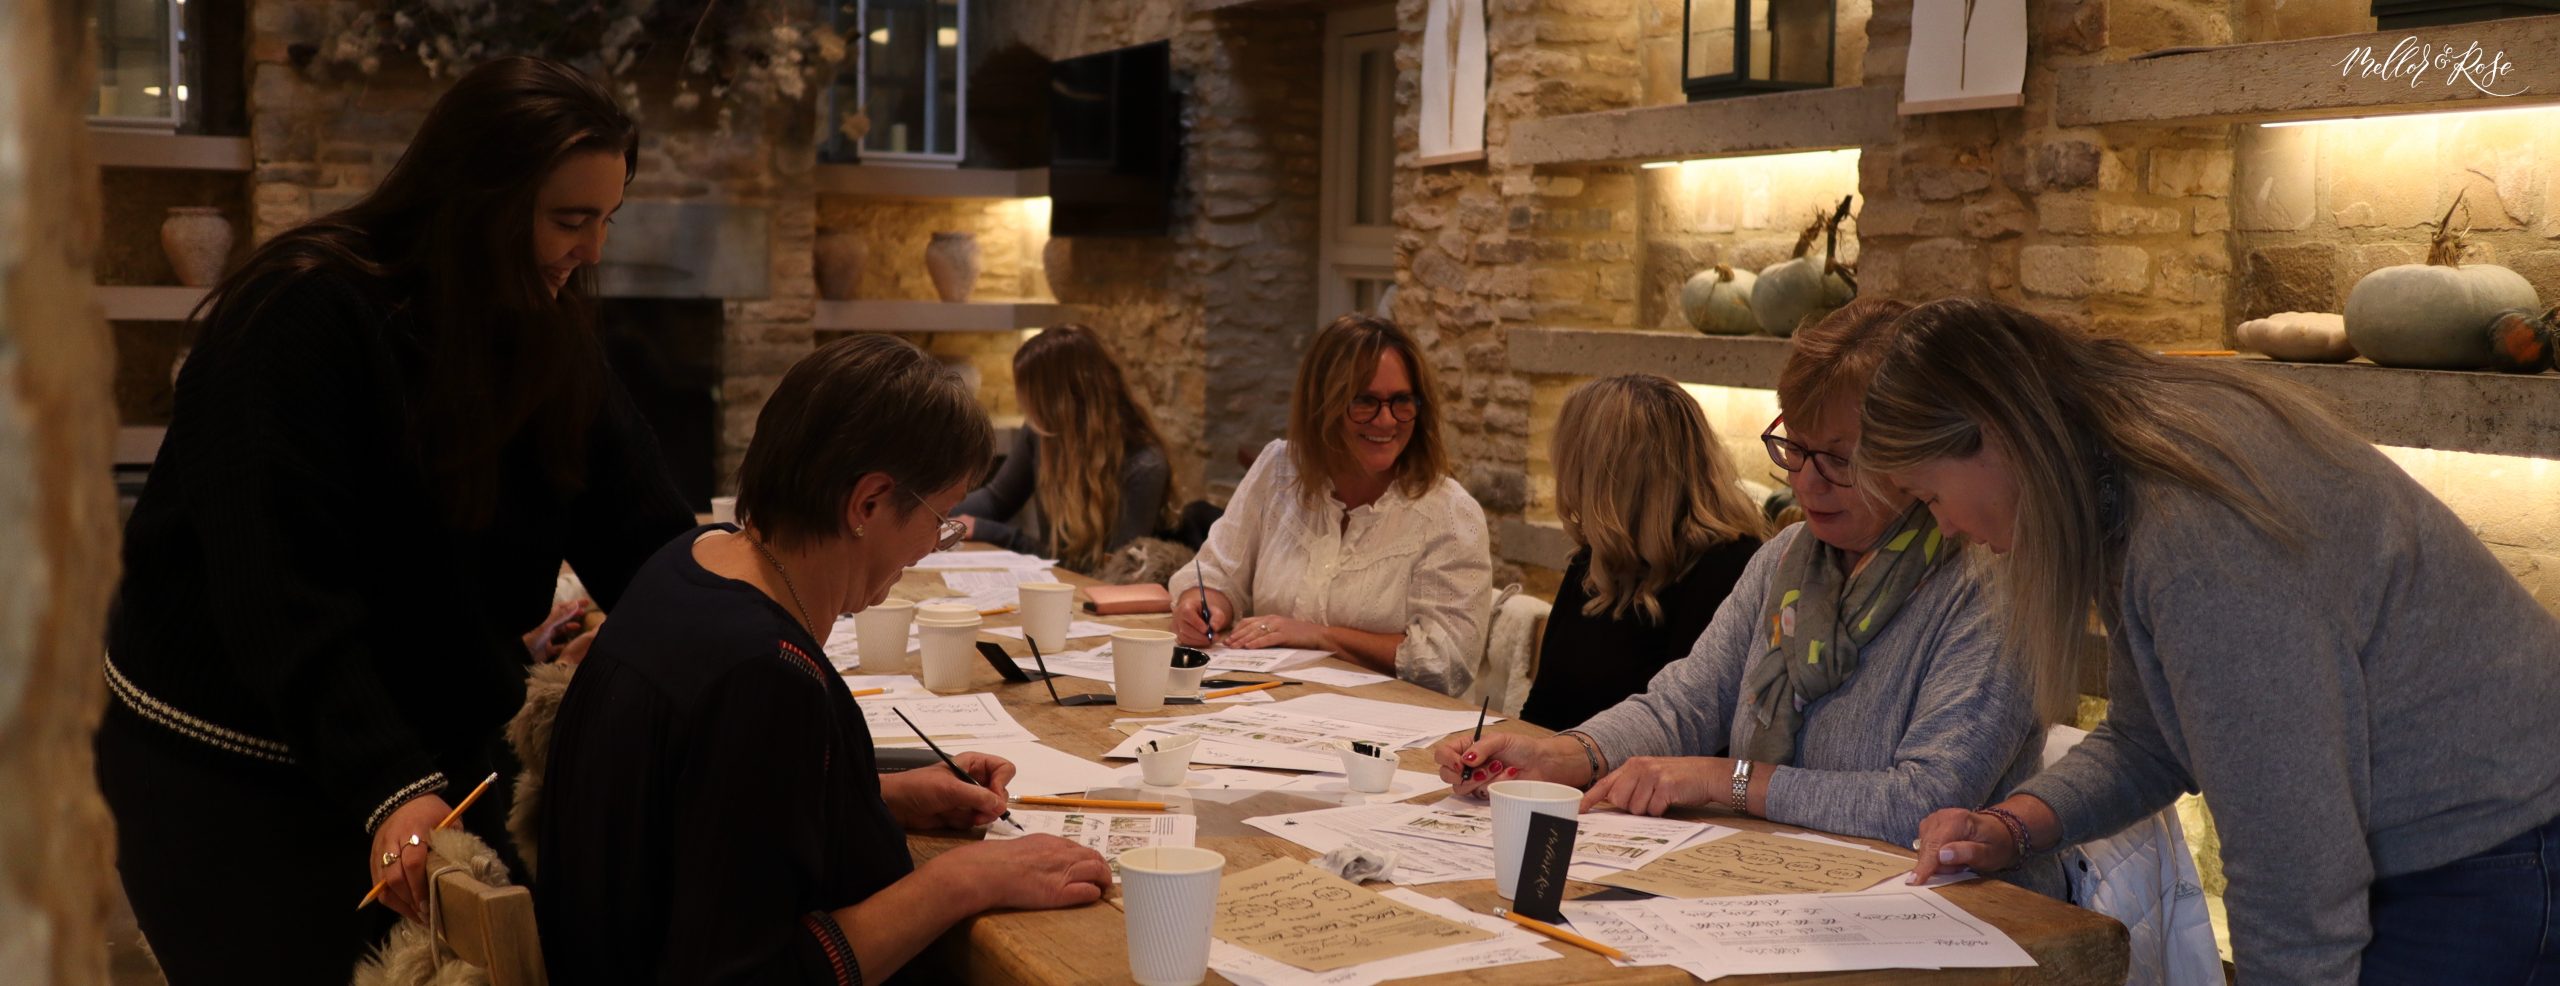 Christmas Calligraphy Workshops at Daylesford Organic with Mellor & Rose